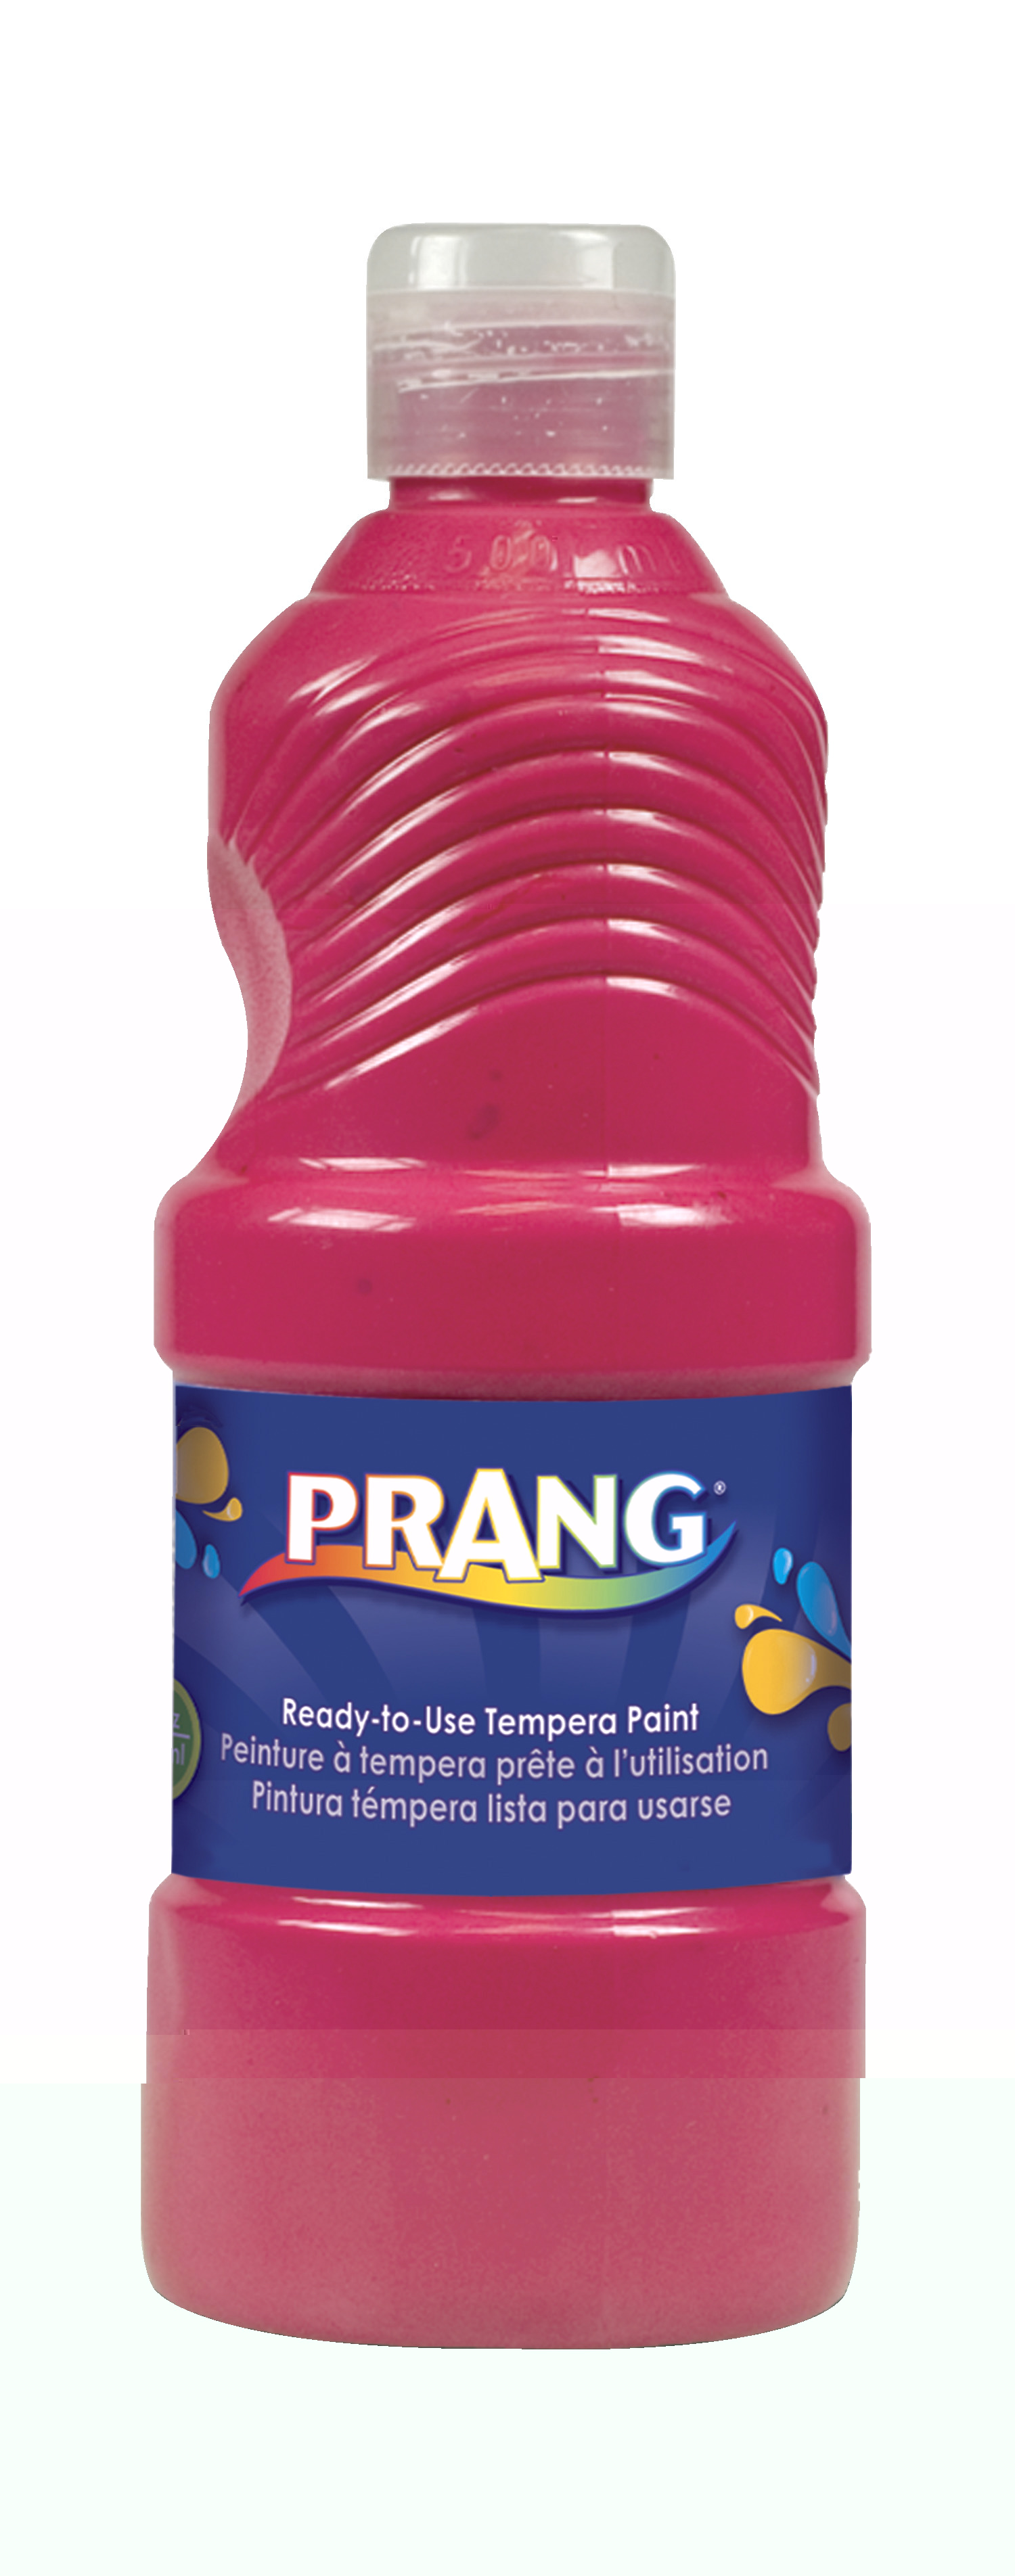 Prang Ready-to-use  Tempera Paint, Quart, Red